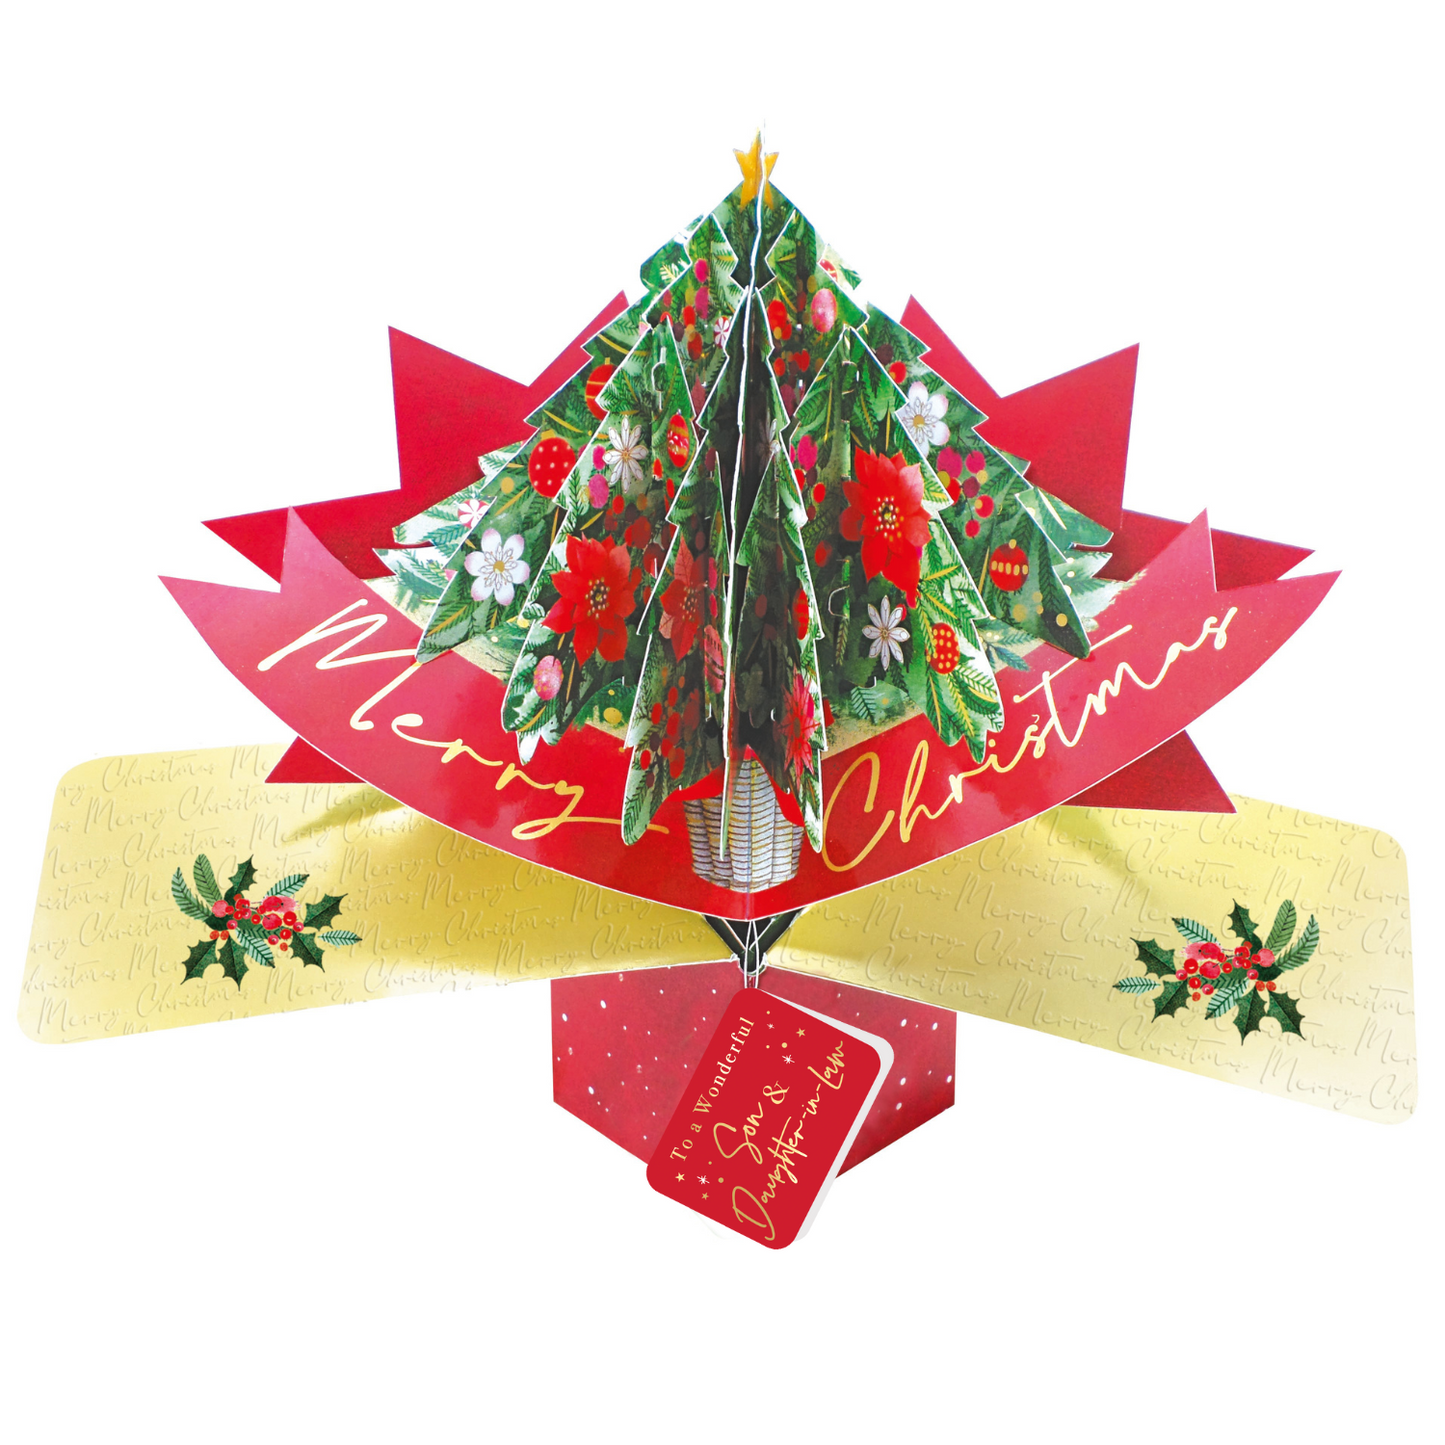 Son & Daughter-In-Law Christmas Card 3D Xmas Tree Pop Up Christmas Card